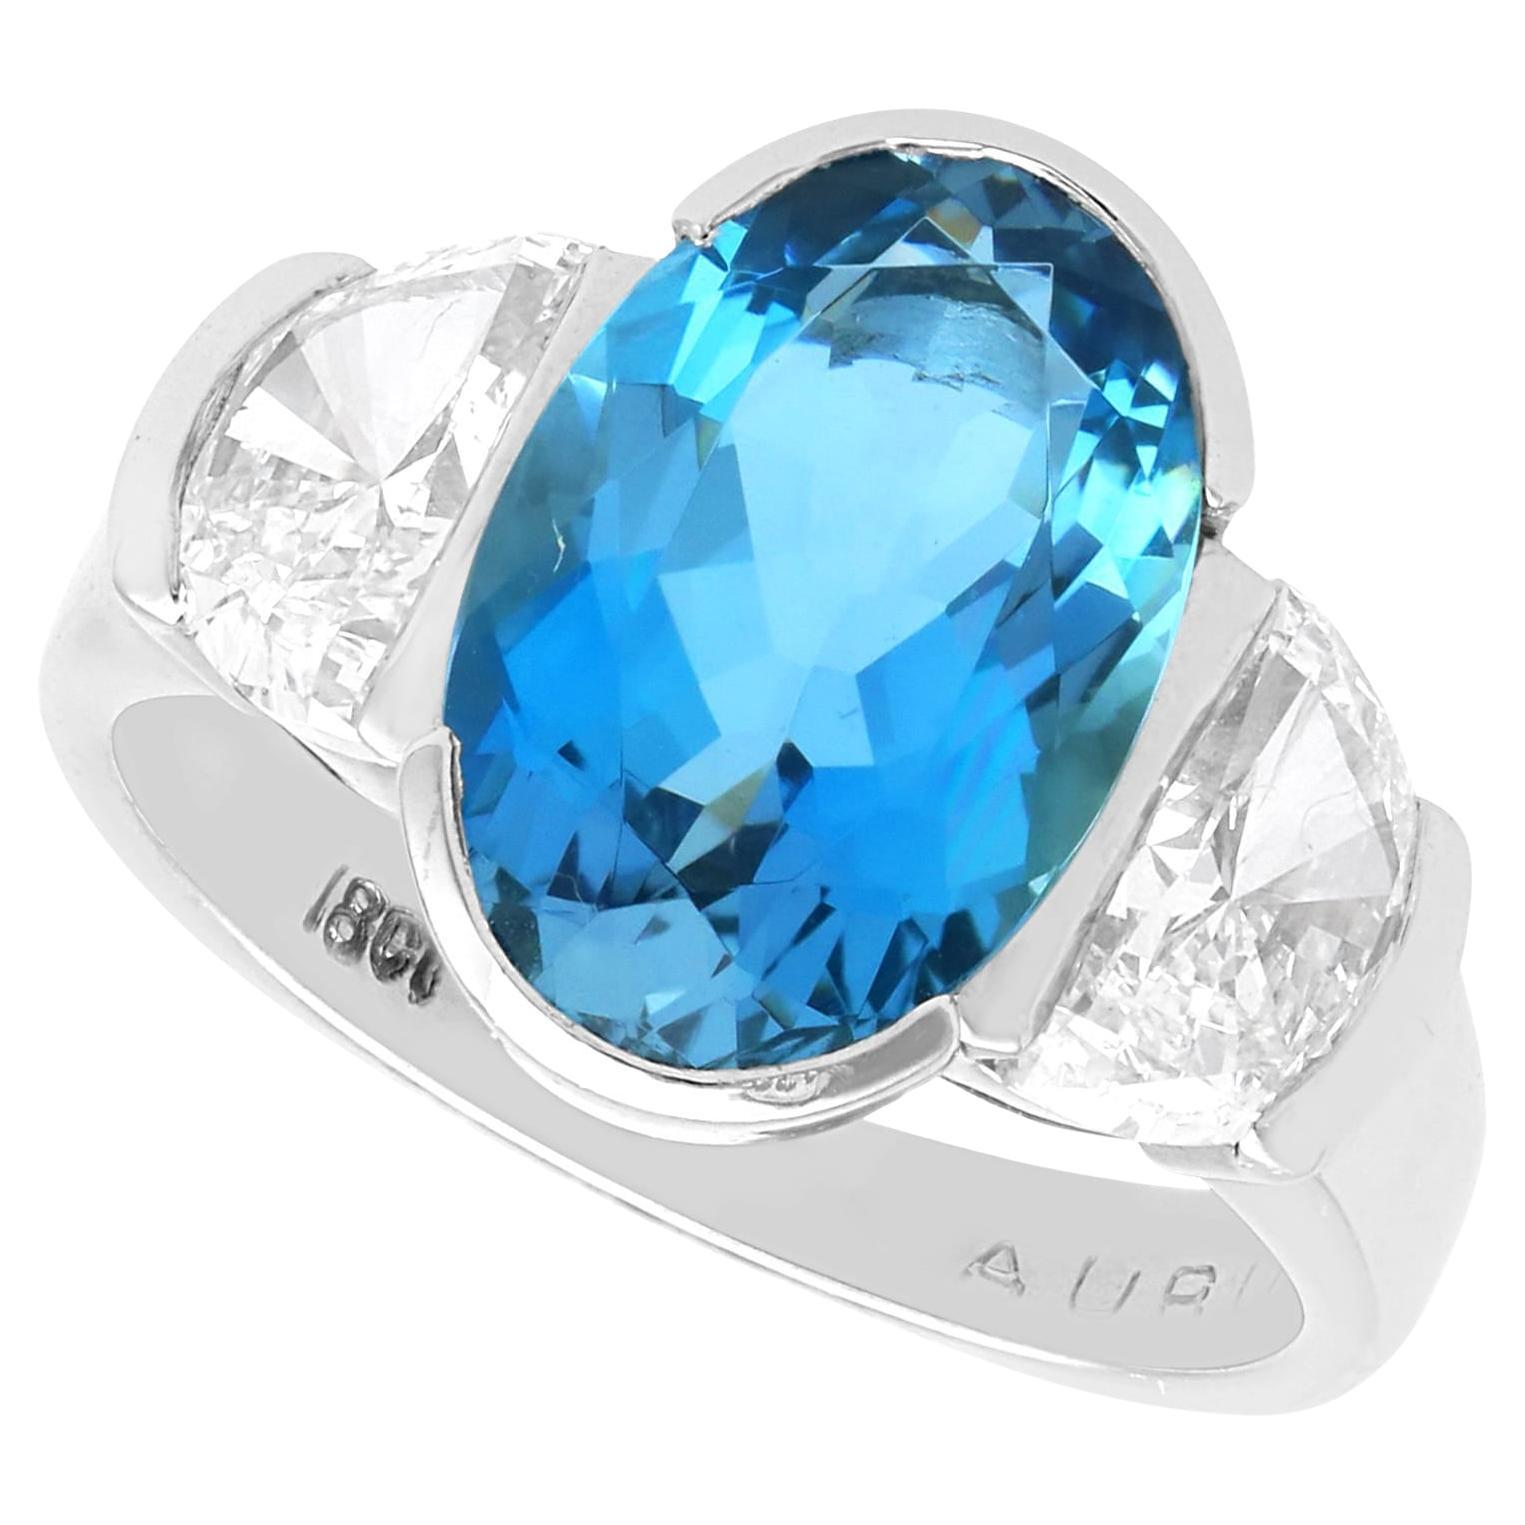 3.28Ct Aquamarine and 1.68Ct Diamond 18k White Gold Cocktail Ring Circa 2000 For Sale